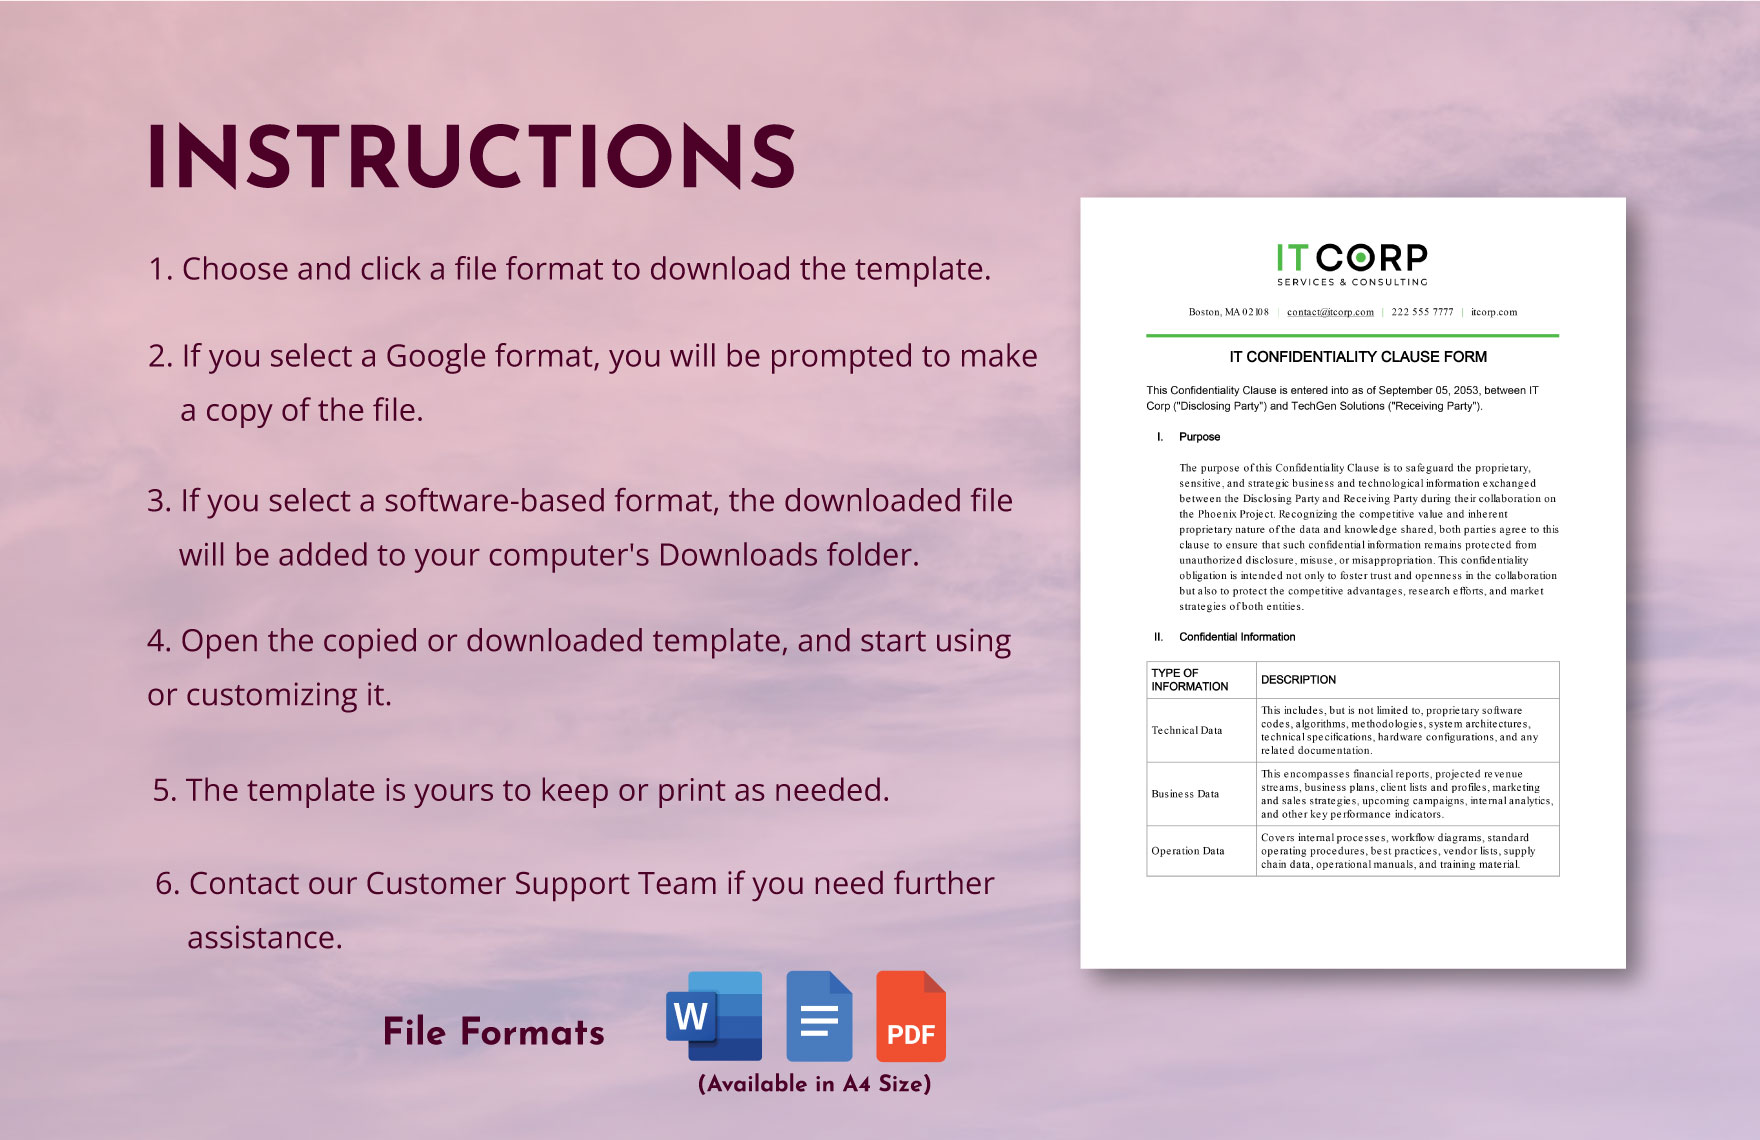 IT Confidentiality Clause Form Template